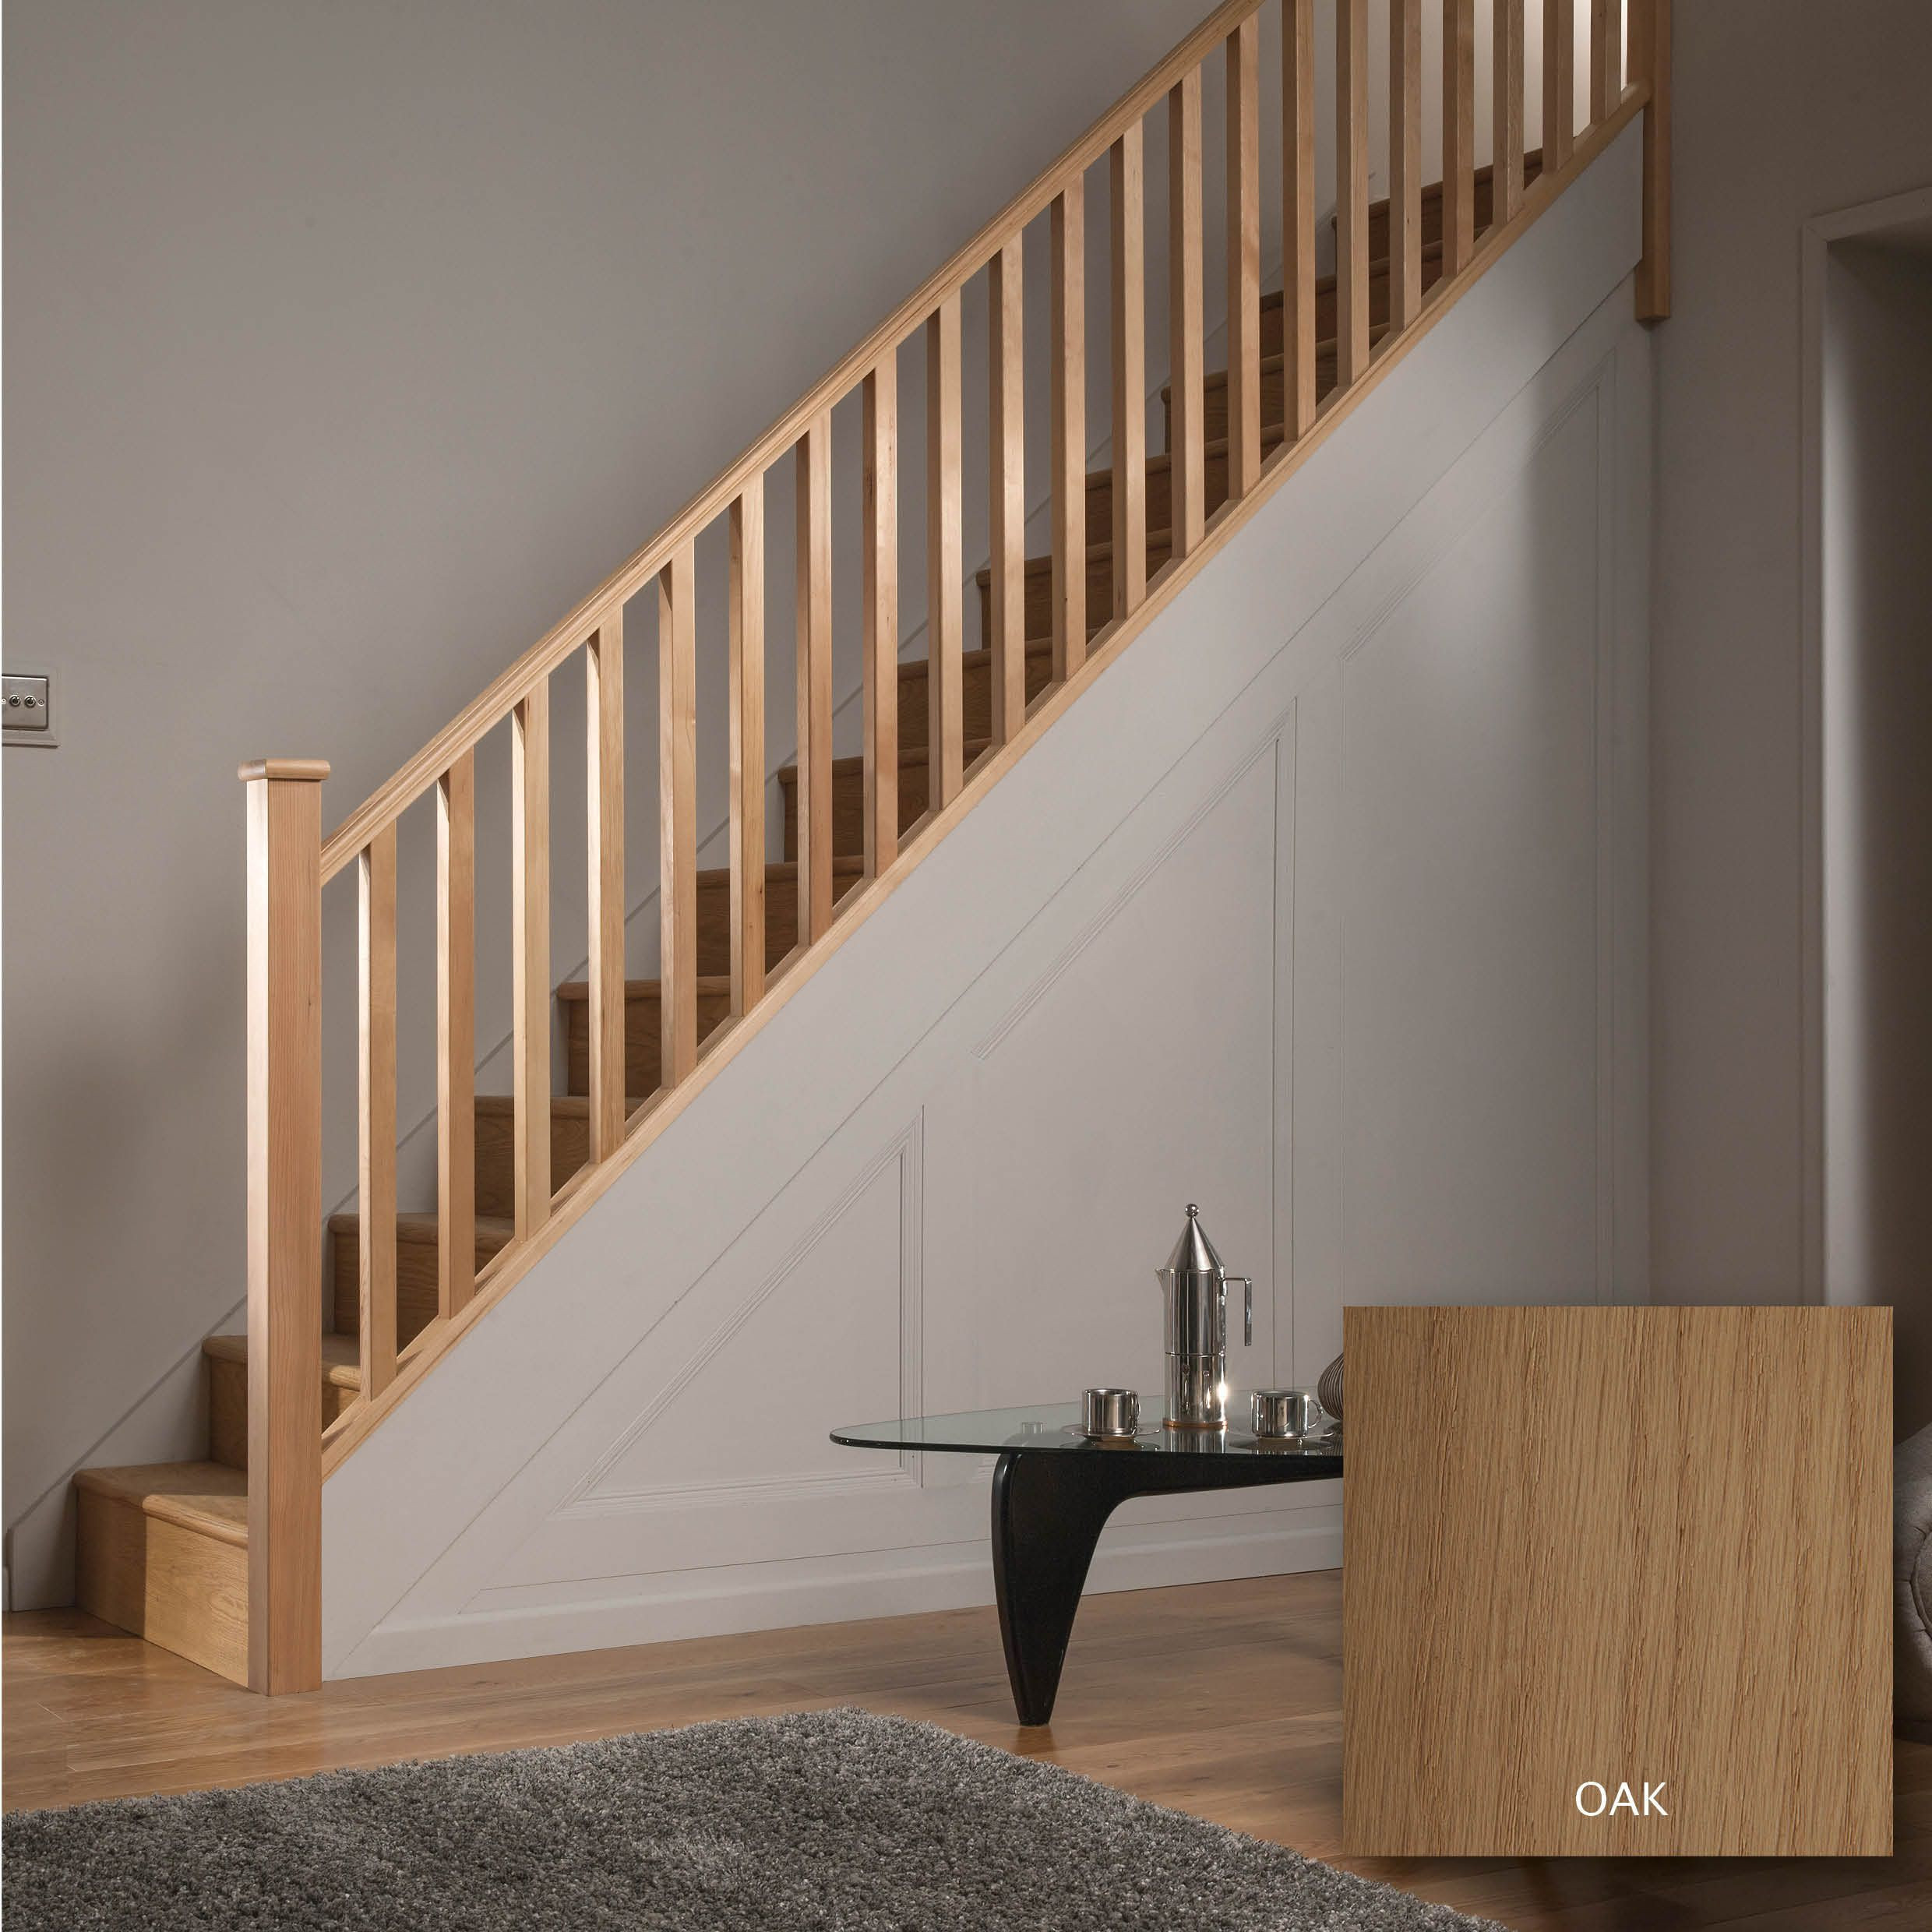 Diy Staircase Kits Inspirational Square Oak 32mm Plete Banister Project Kit Of Diy Staircase Kits 